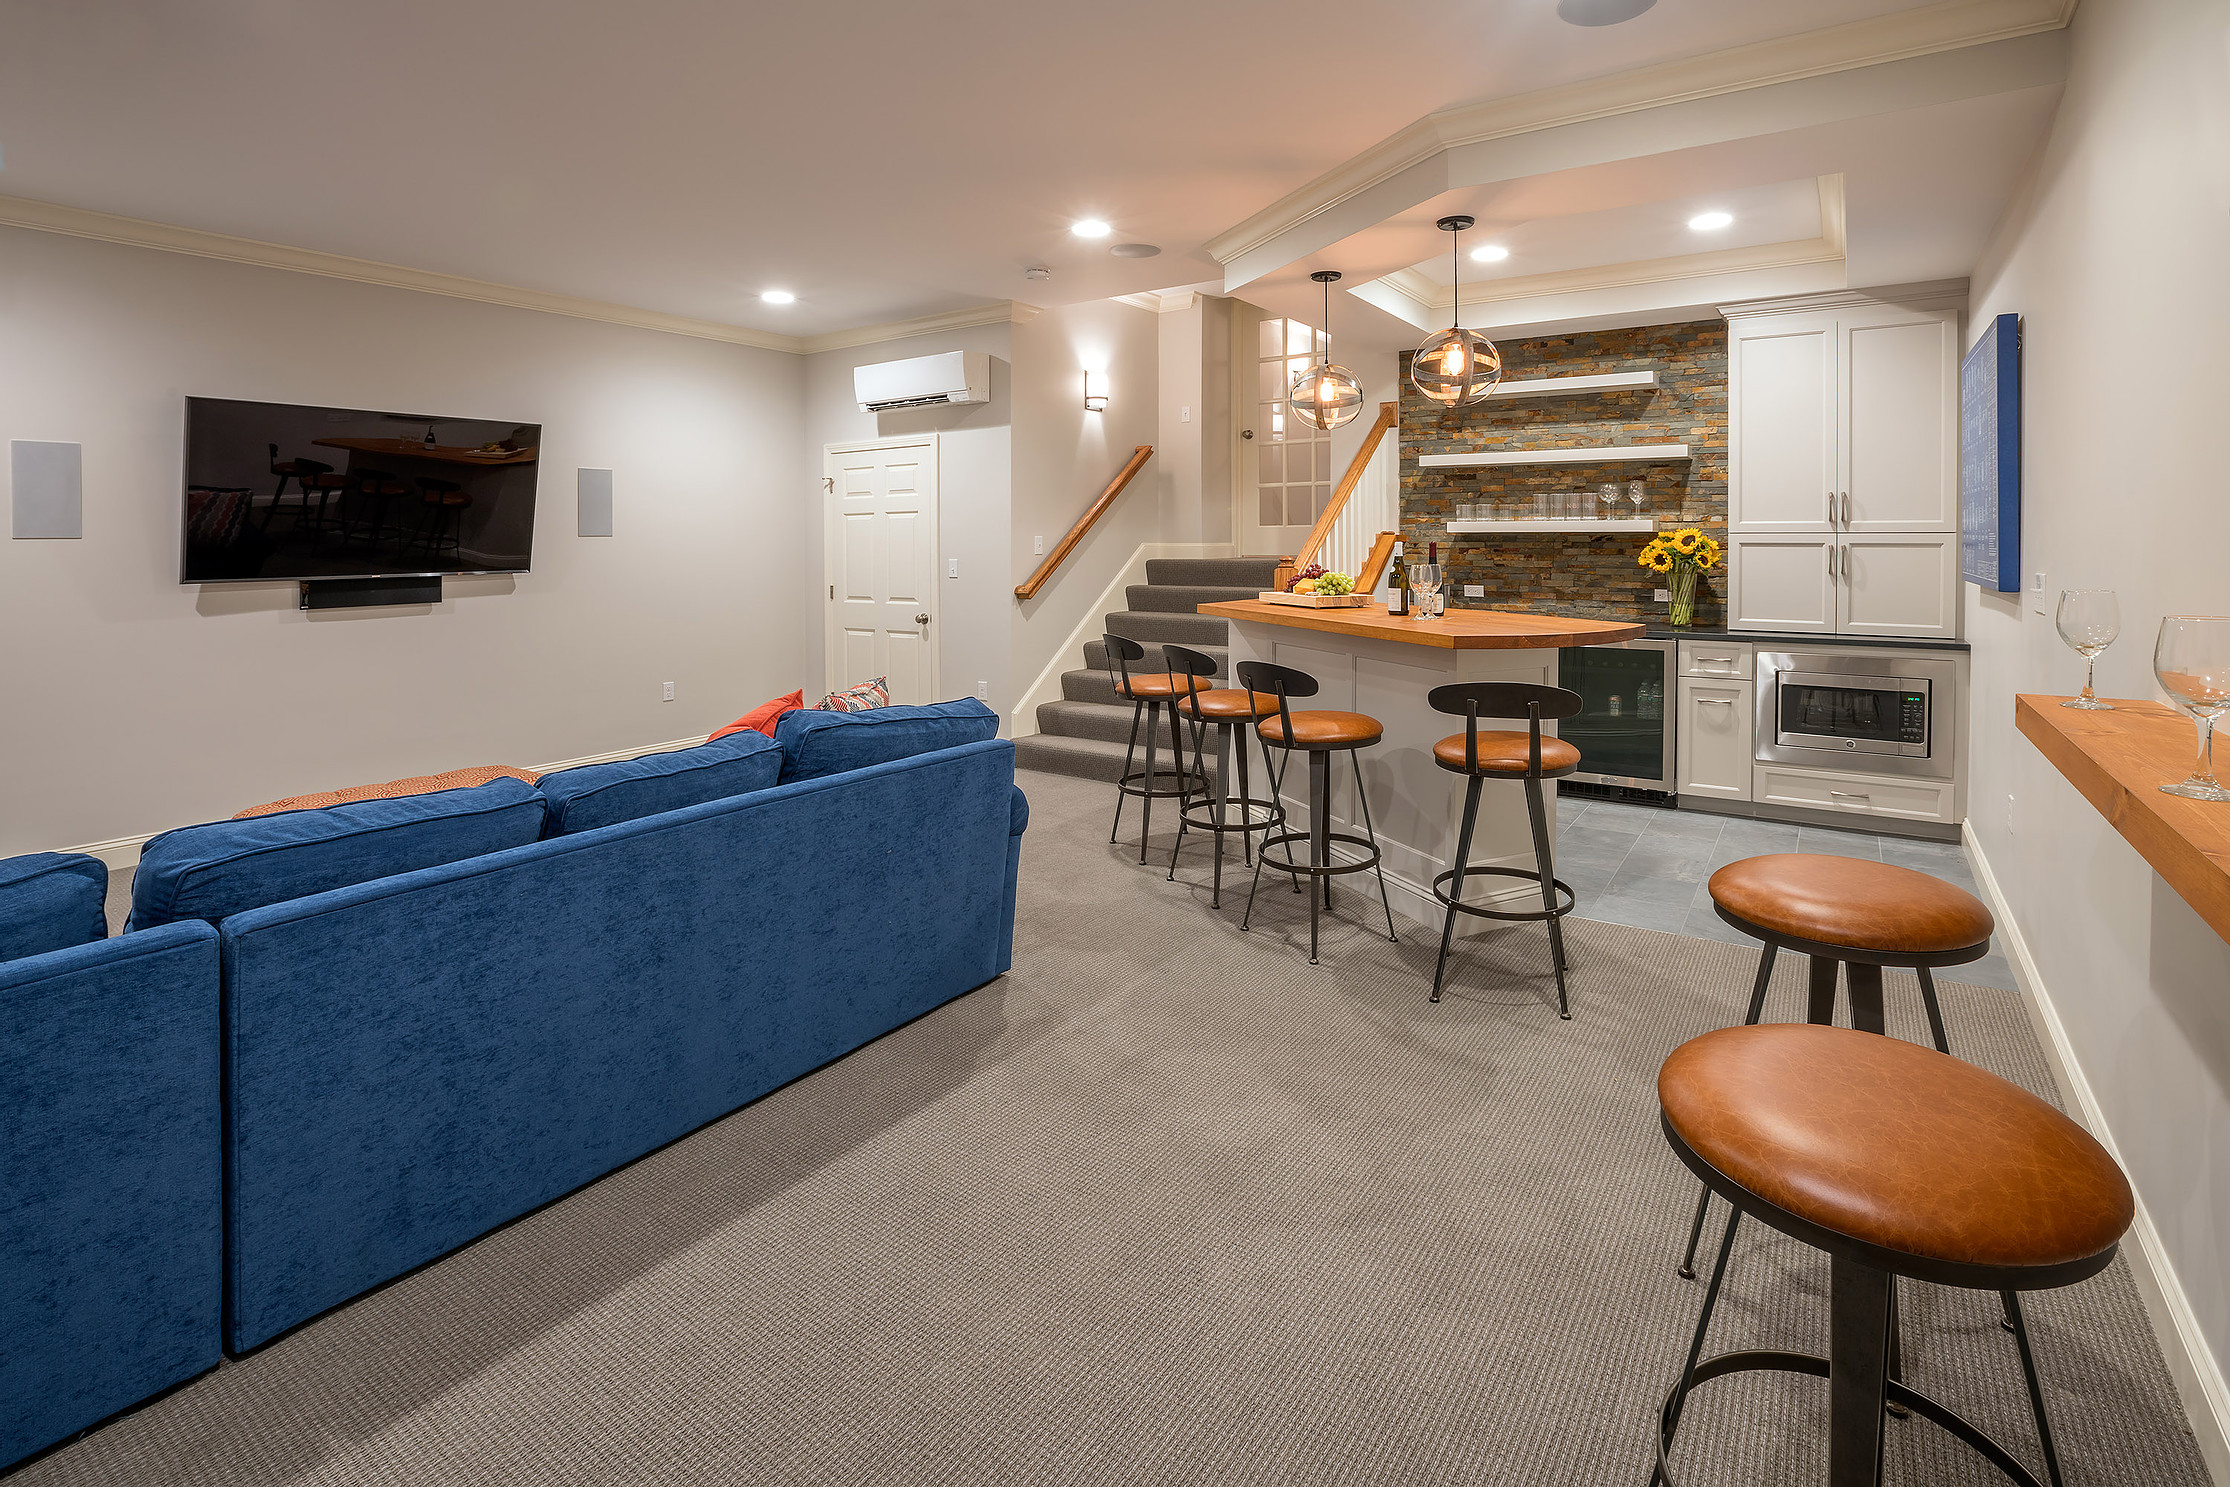 Basement Bar and Couch